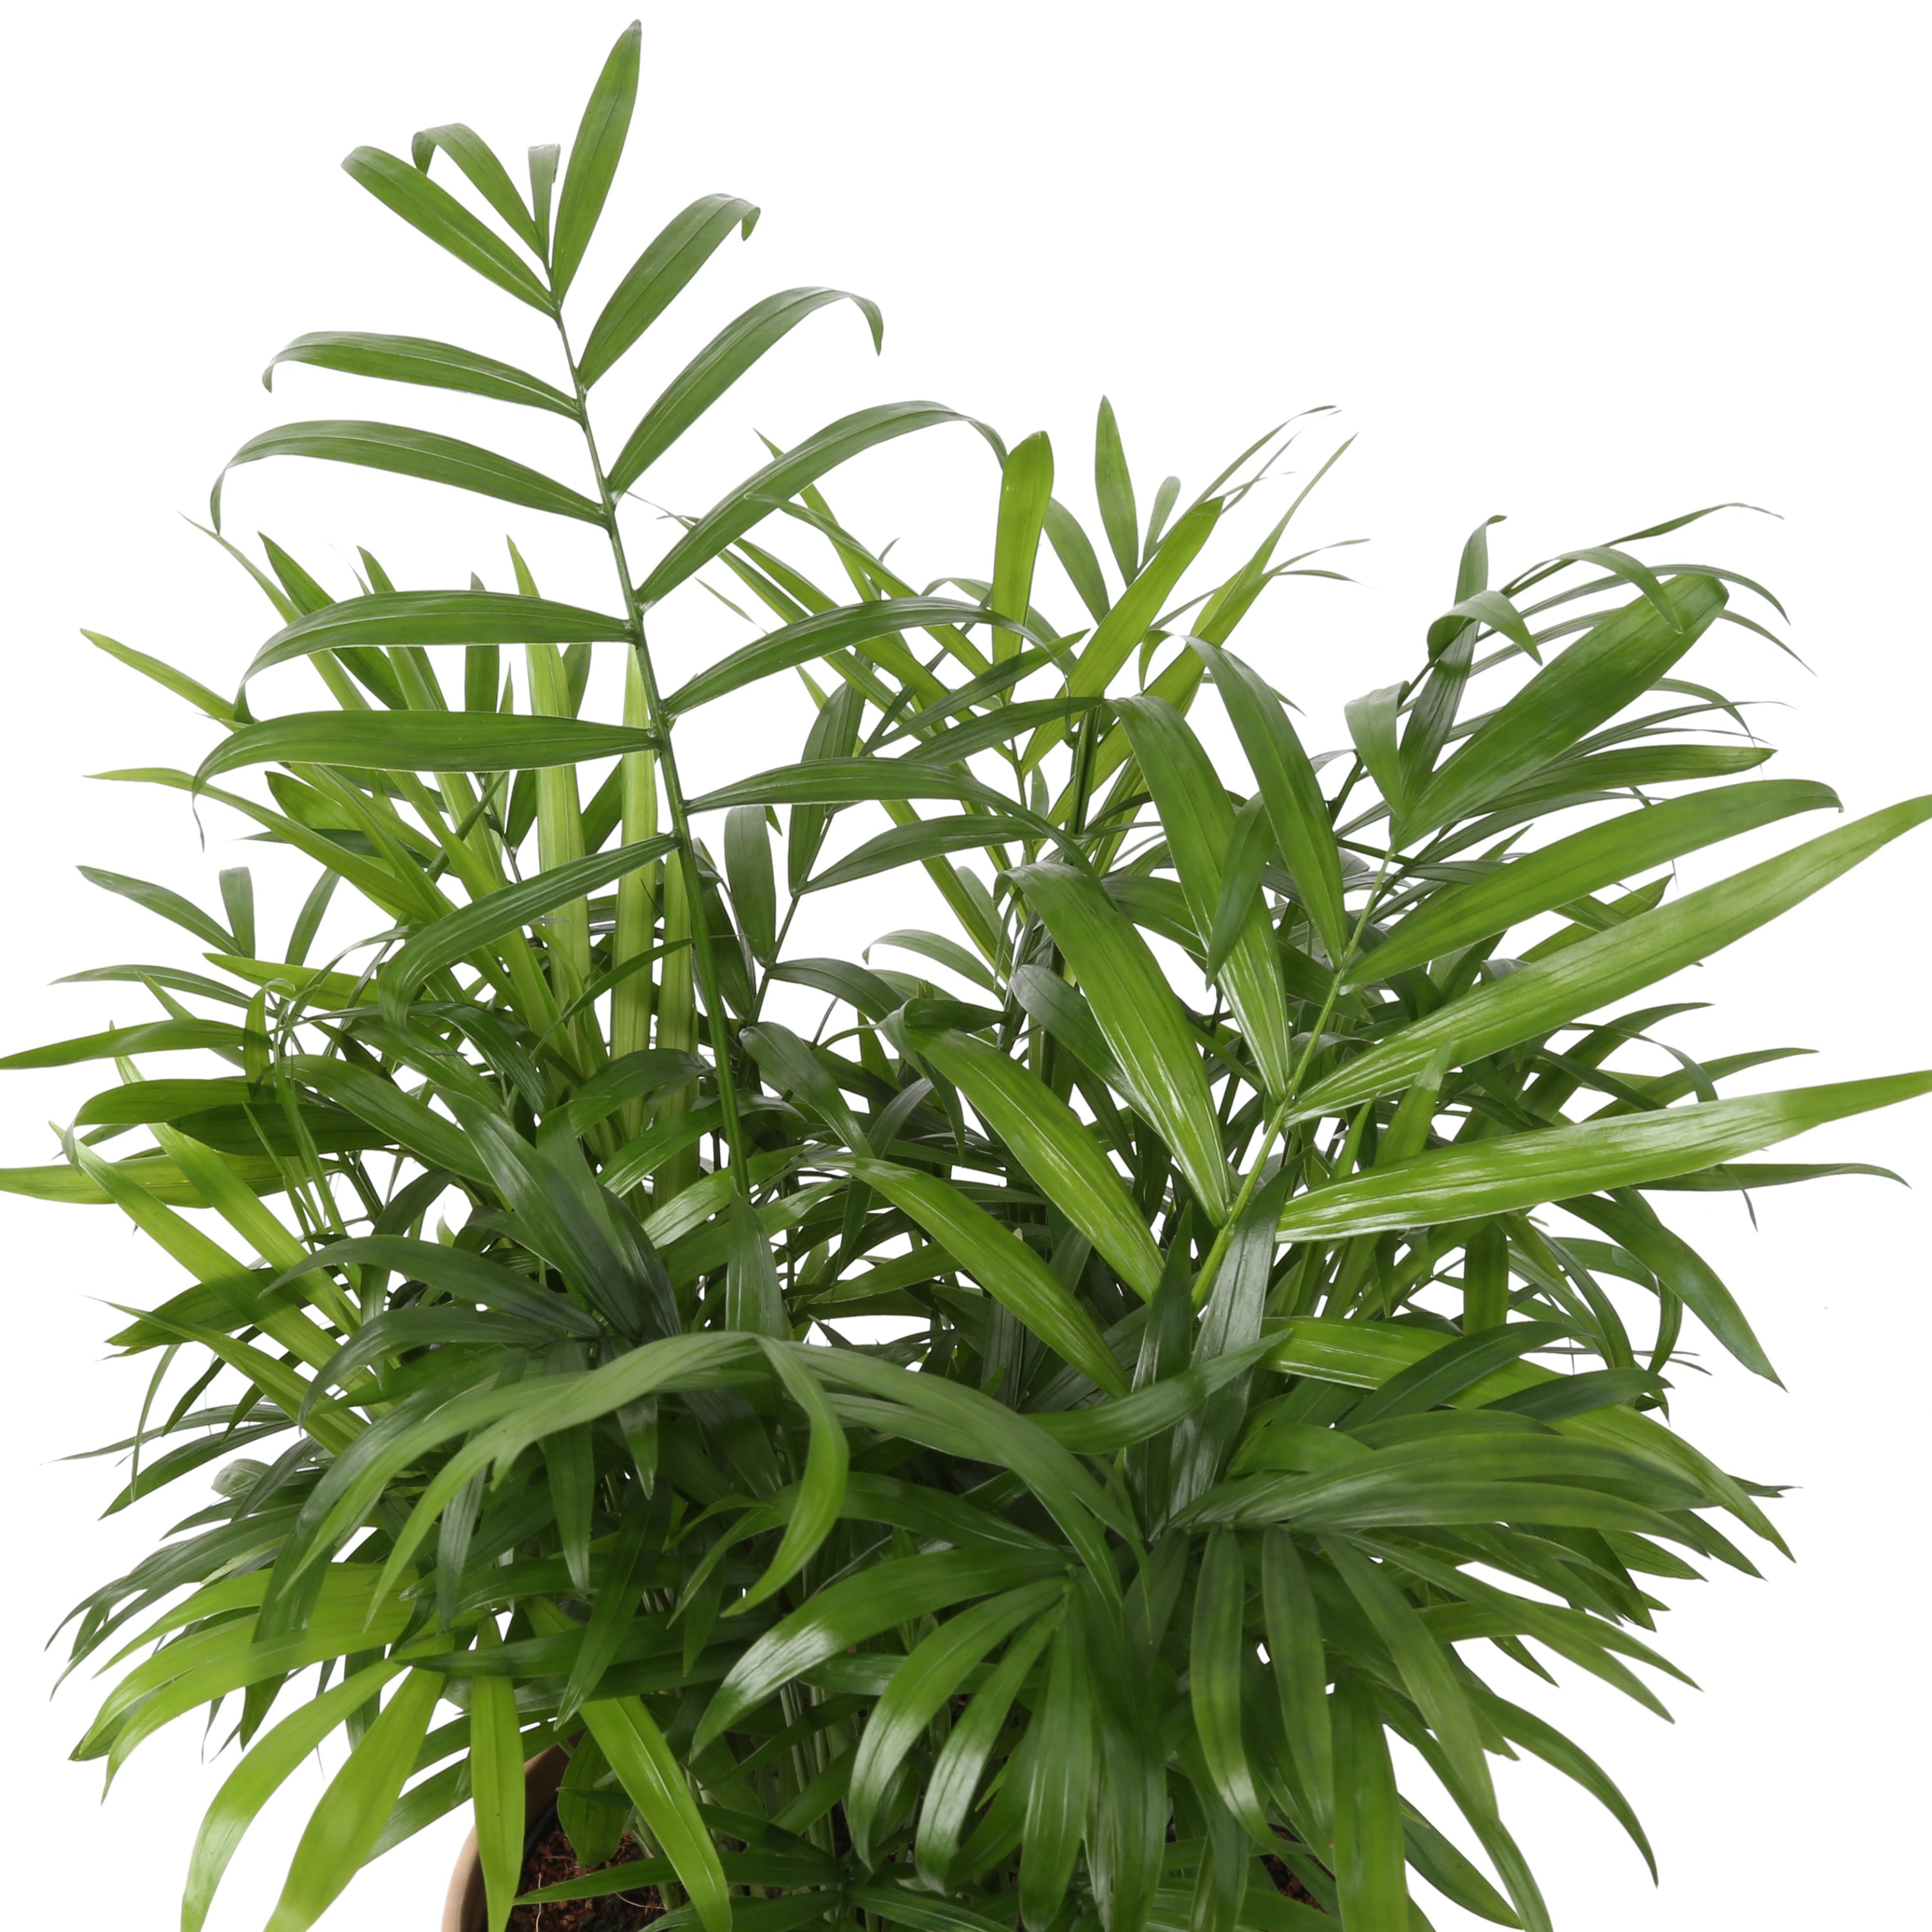 Costa Farms  Live Indoor 12in. Tall Green Parlor Palm Tree; Bright， Indirect Sunlight Plant in 6in. Grower Pot